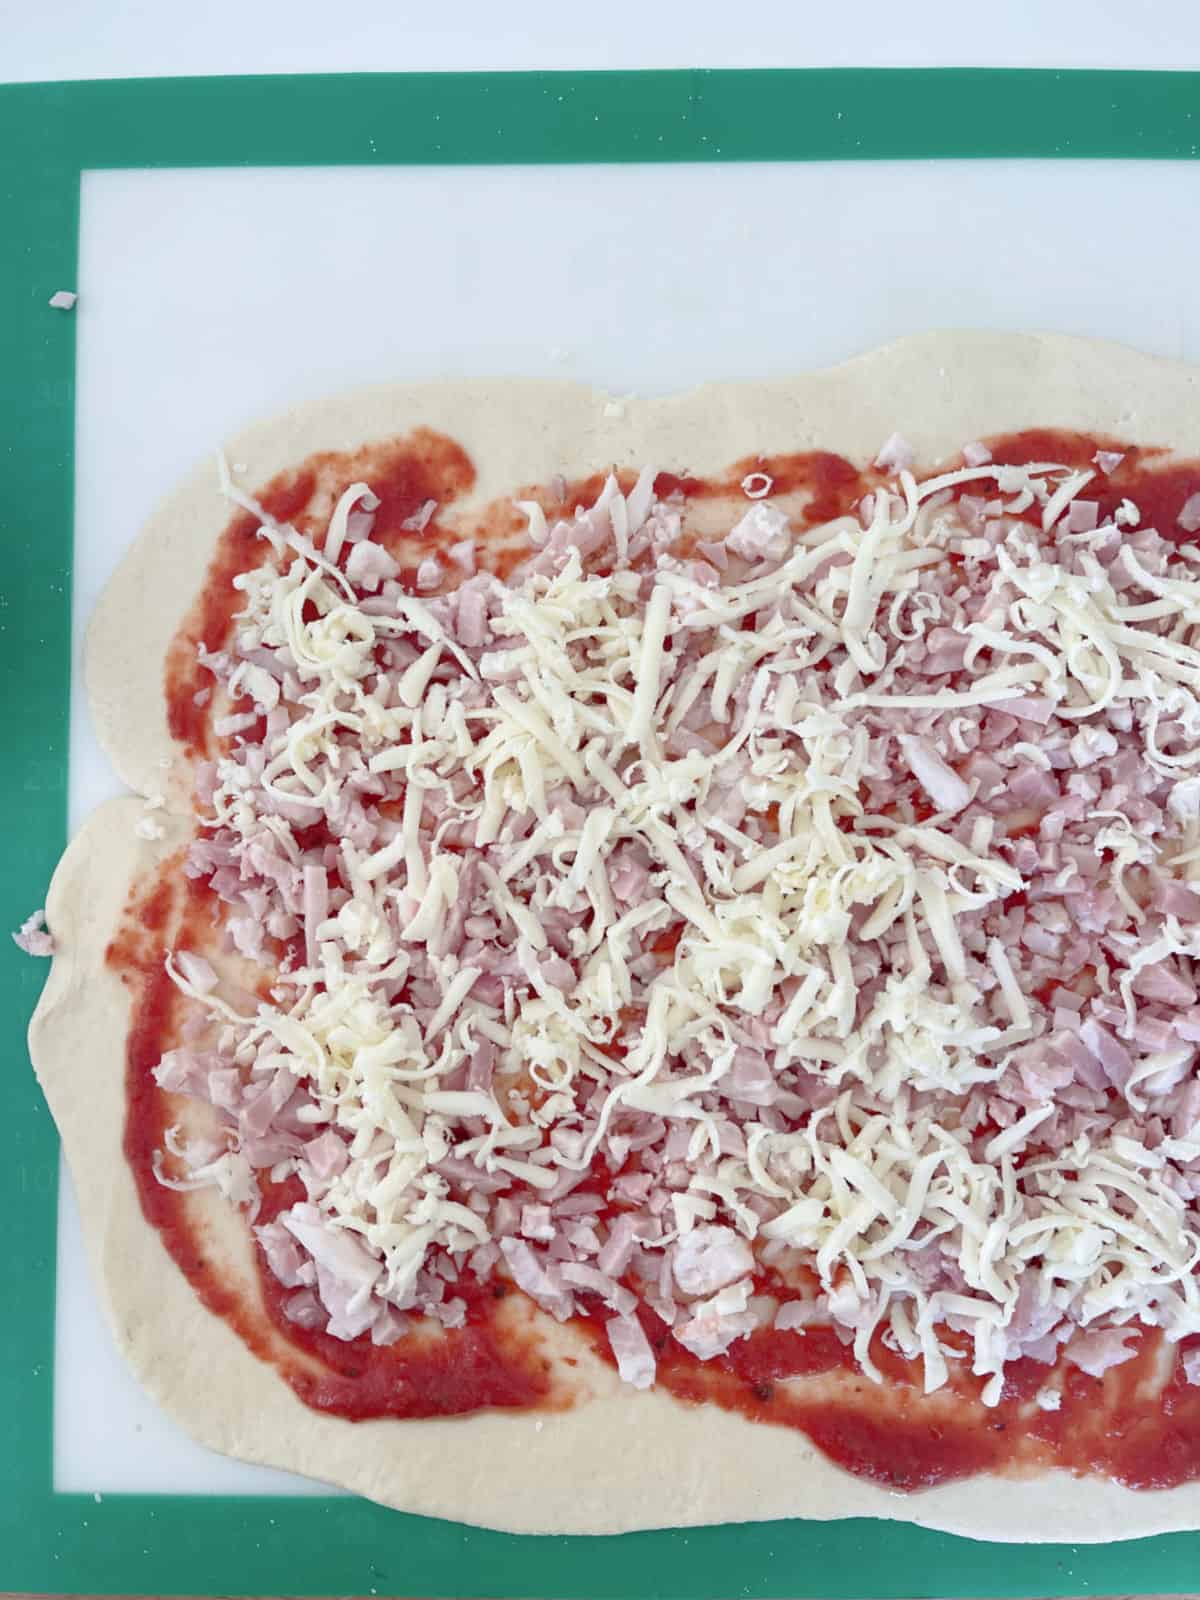 Scroll dough topped with pizza sauce, bacon pieces and cheese.